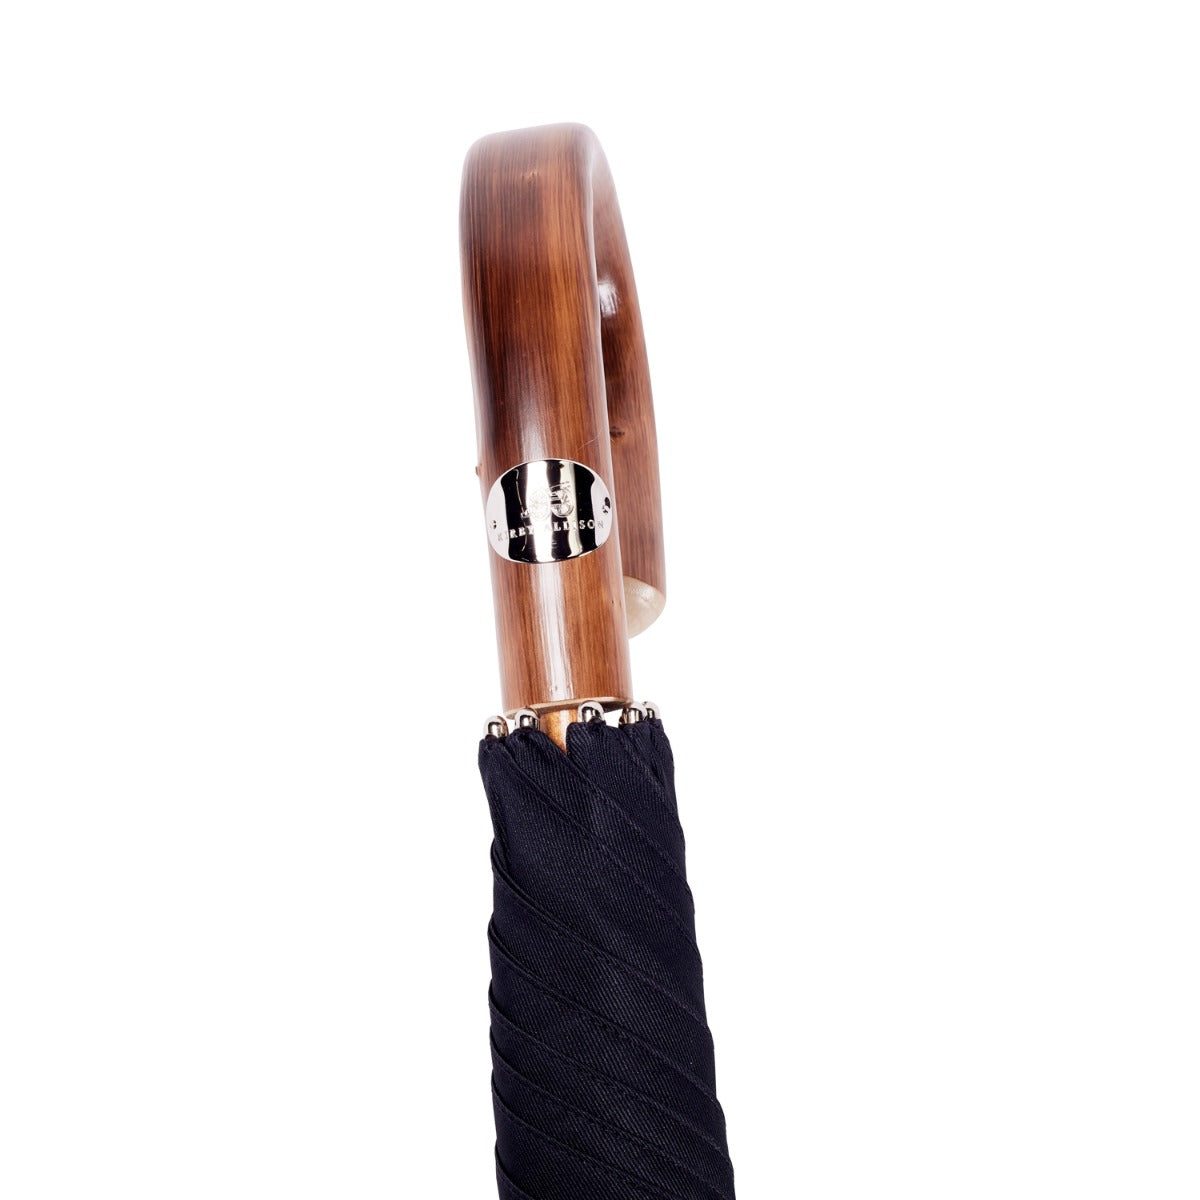 A Chestnut Solid Stick Umbrella with Black Canopy by KirbyAllison.com with a wooden knob-end handle.